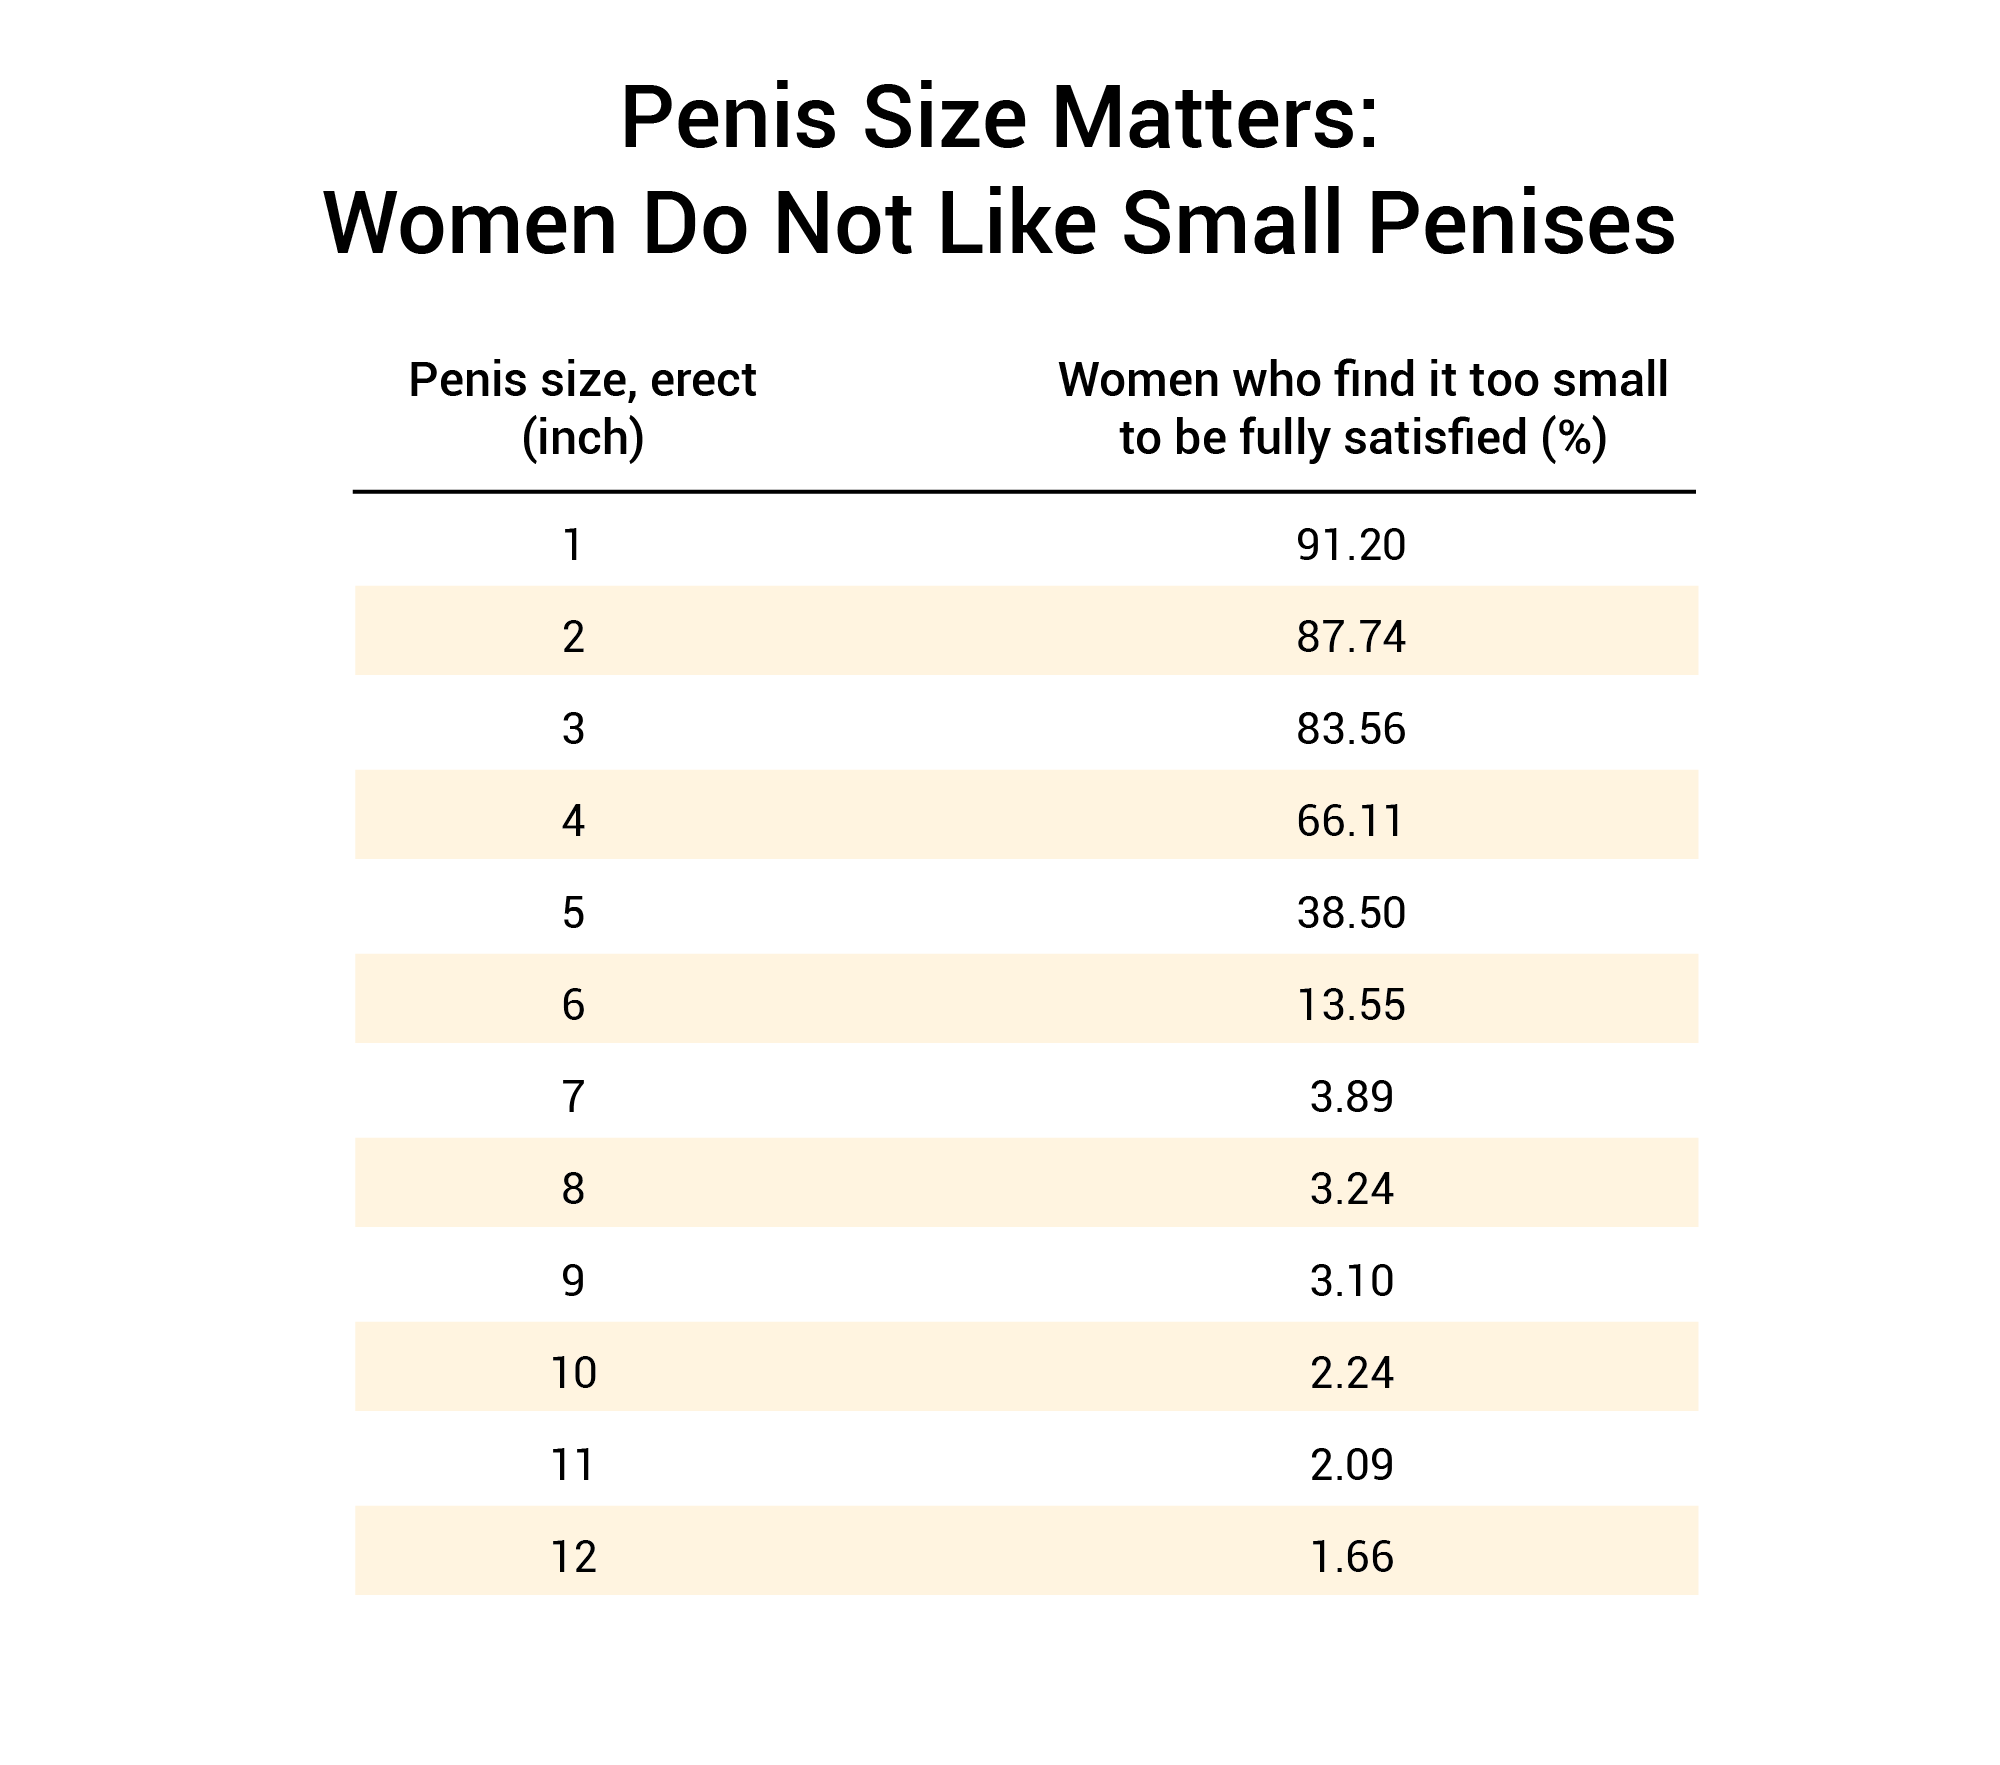 Does Size Matter? 91.7% Of Women Say It Does 1,387 Woman Study